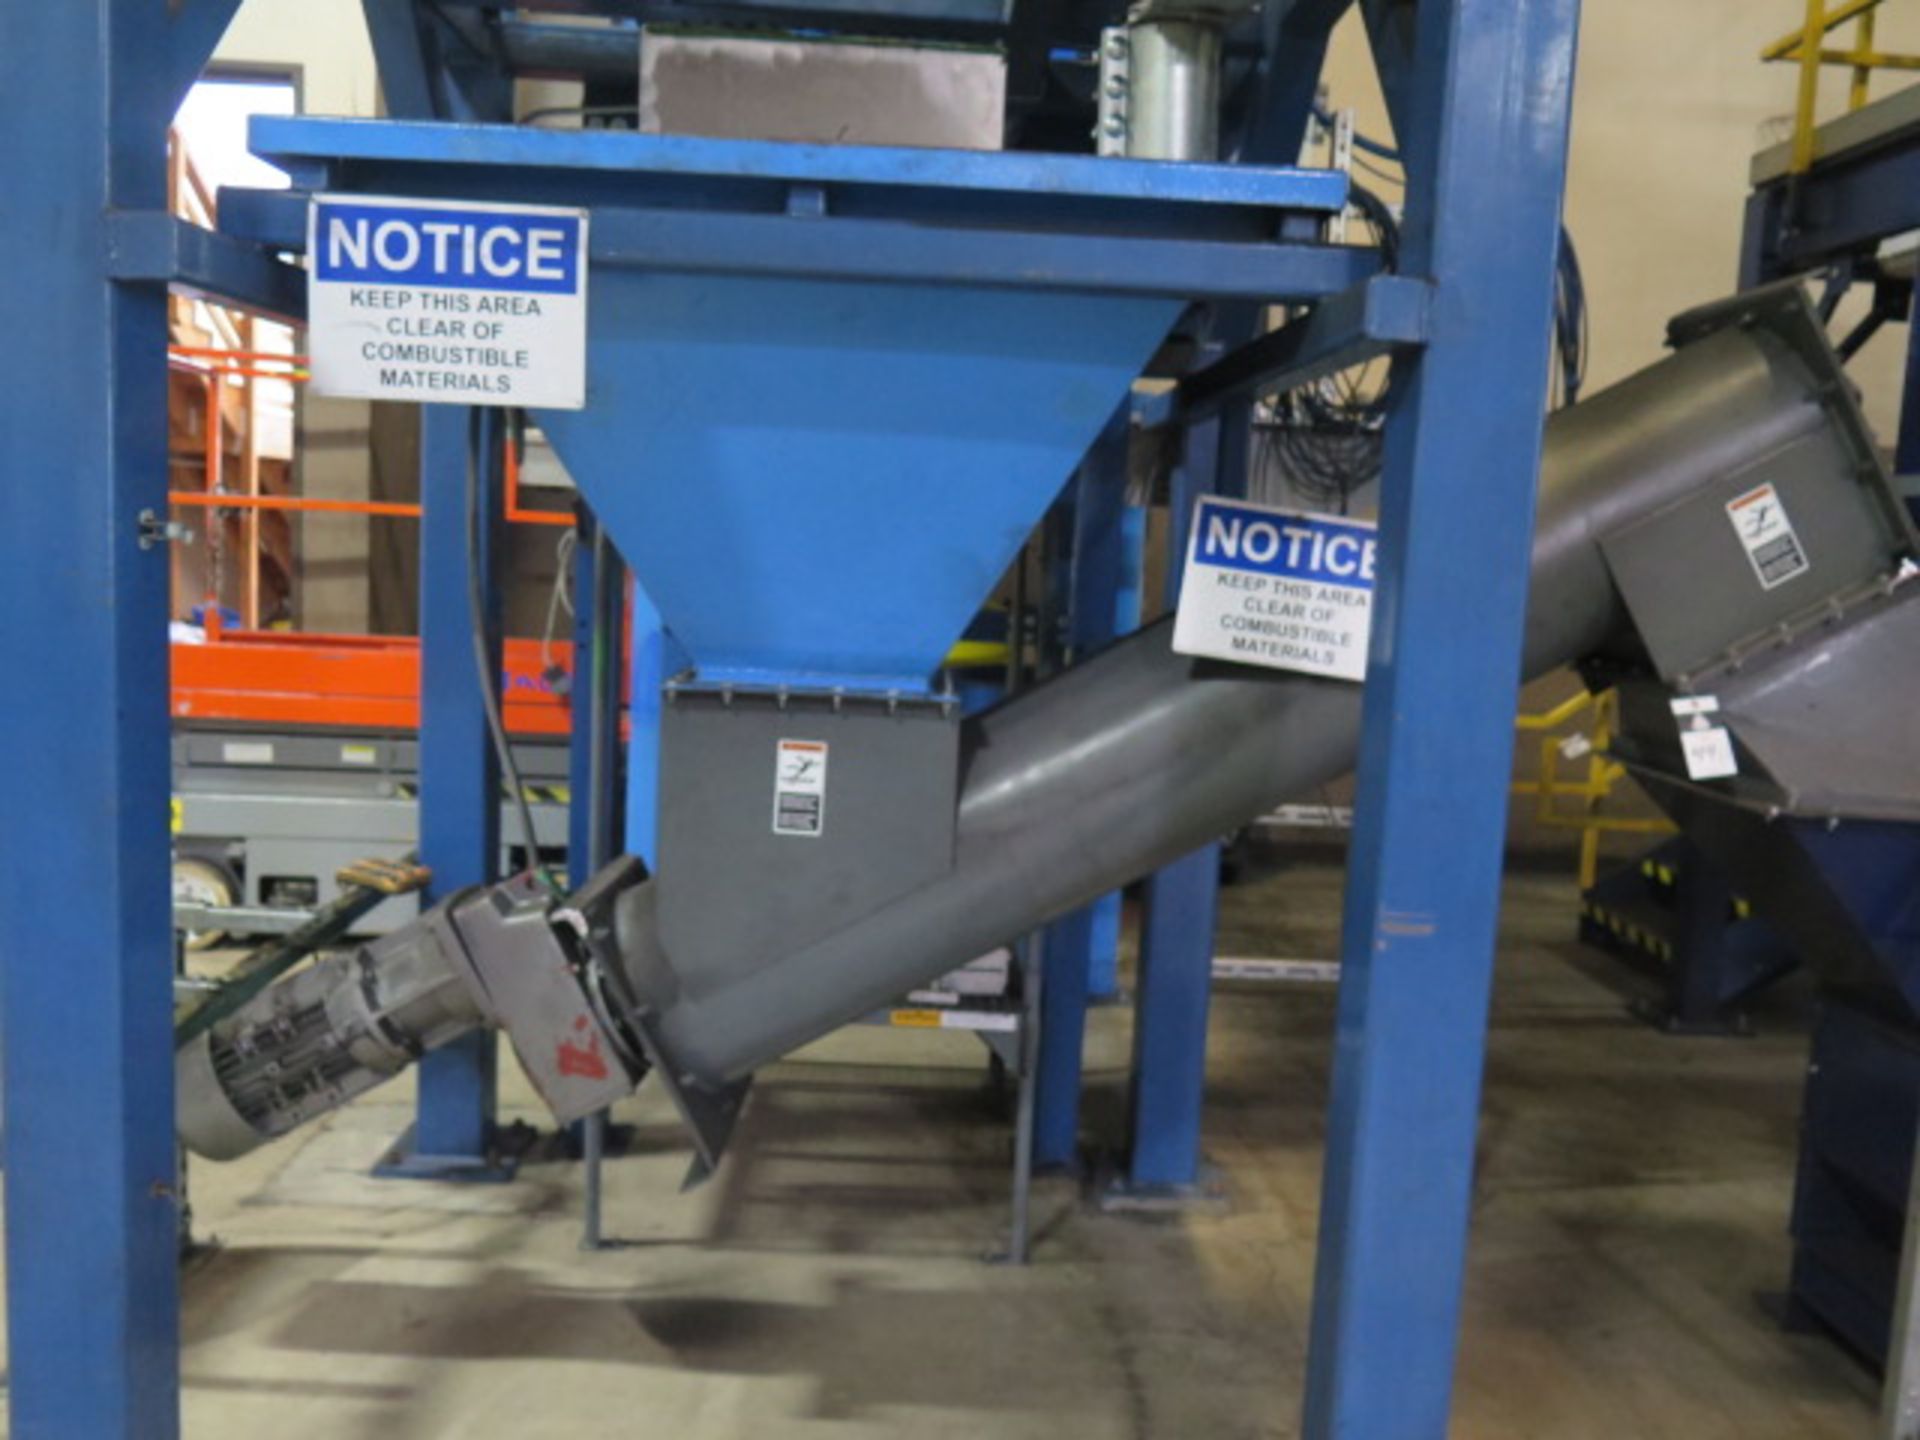 Incline Auger Conveyor and Hopper, SOLD AS IS AND WHERE IS WITH NO WARRANTY